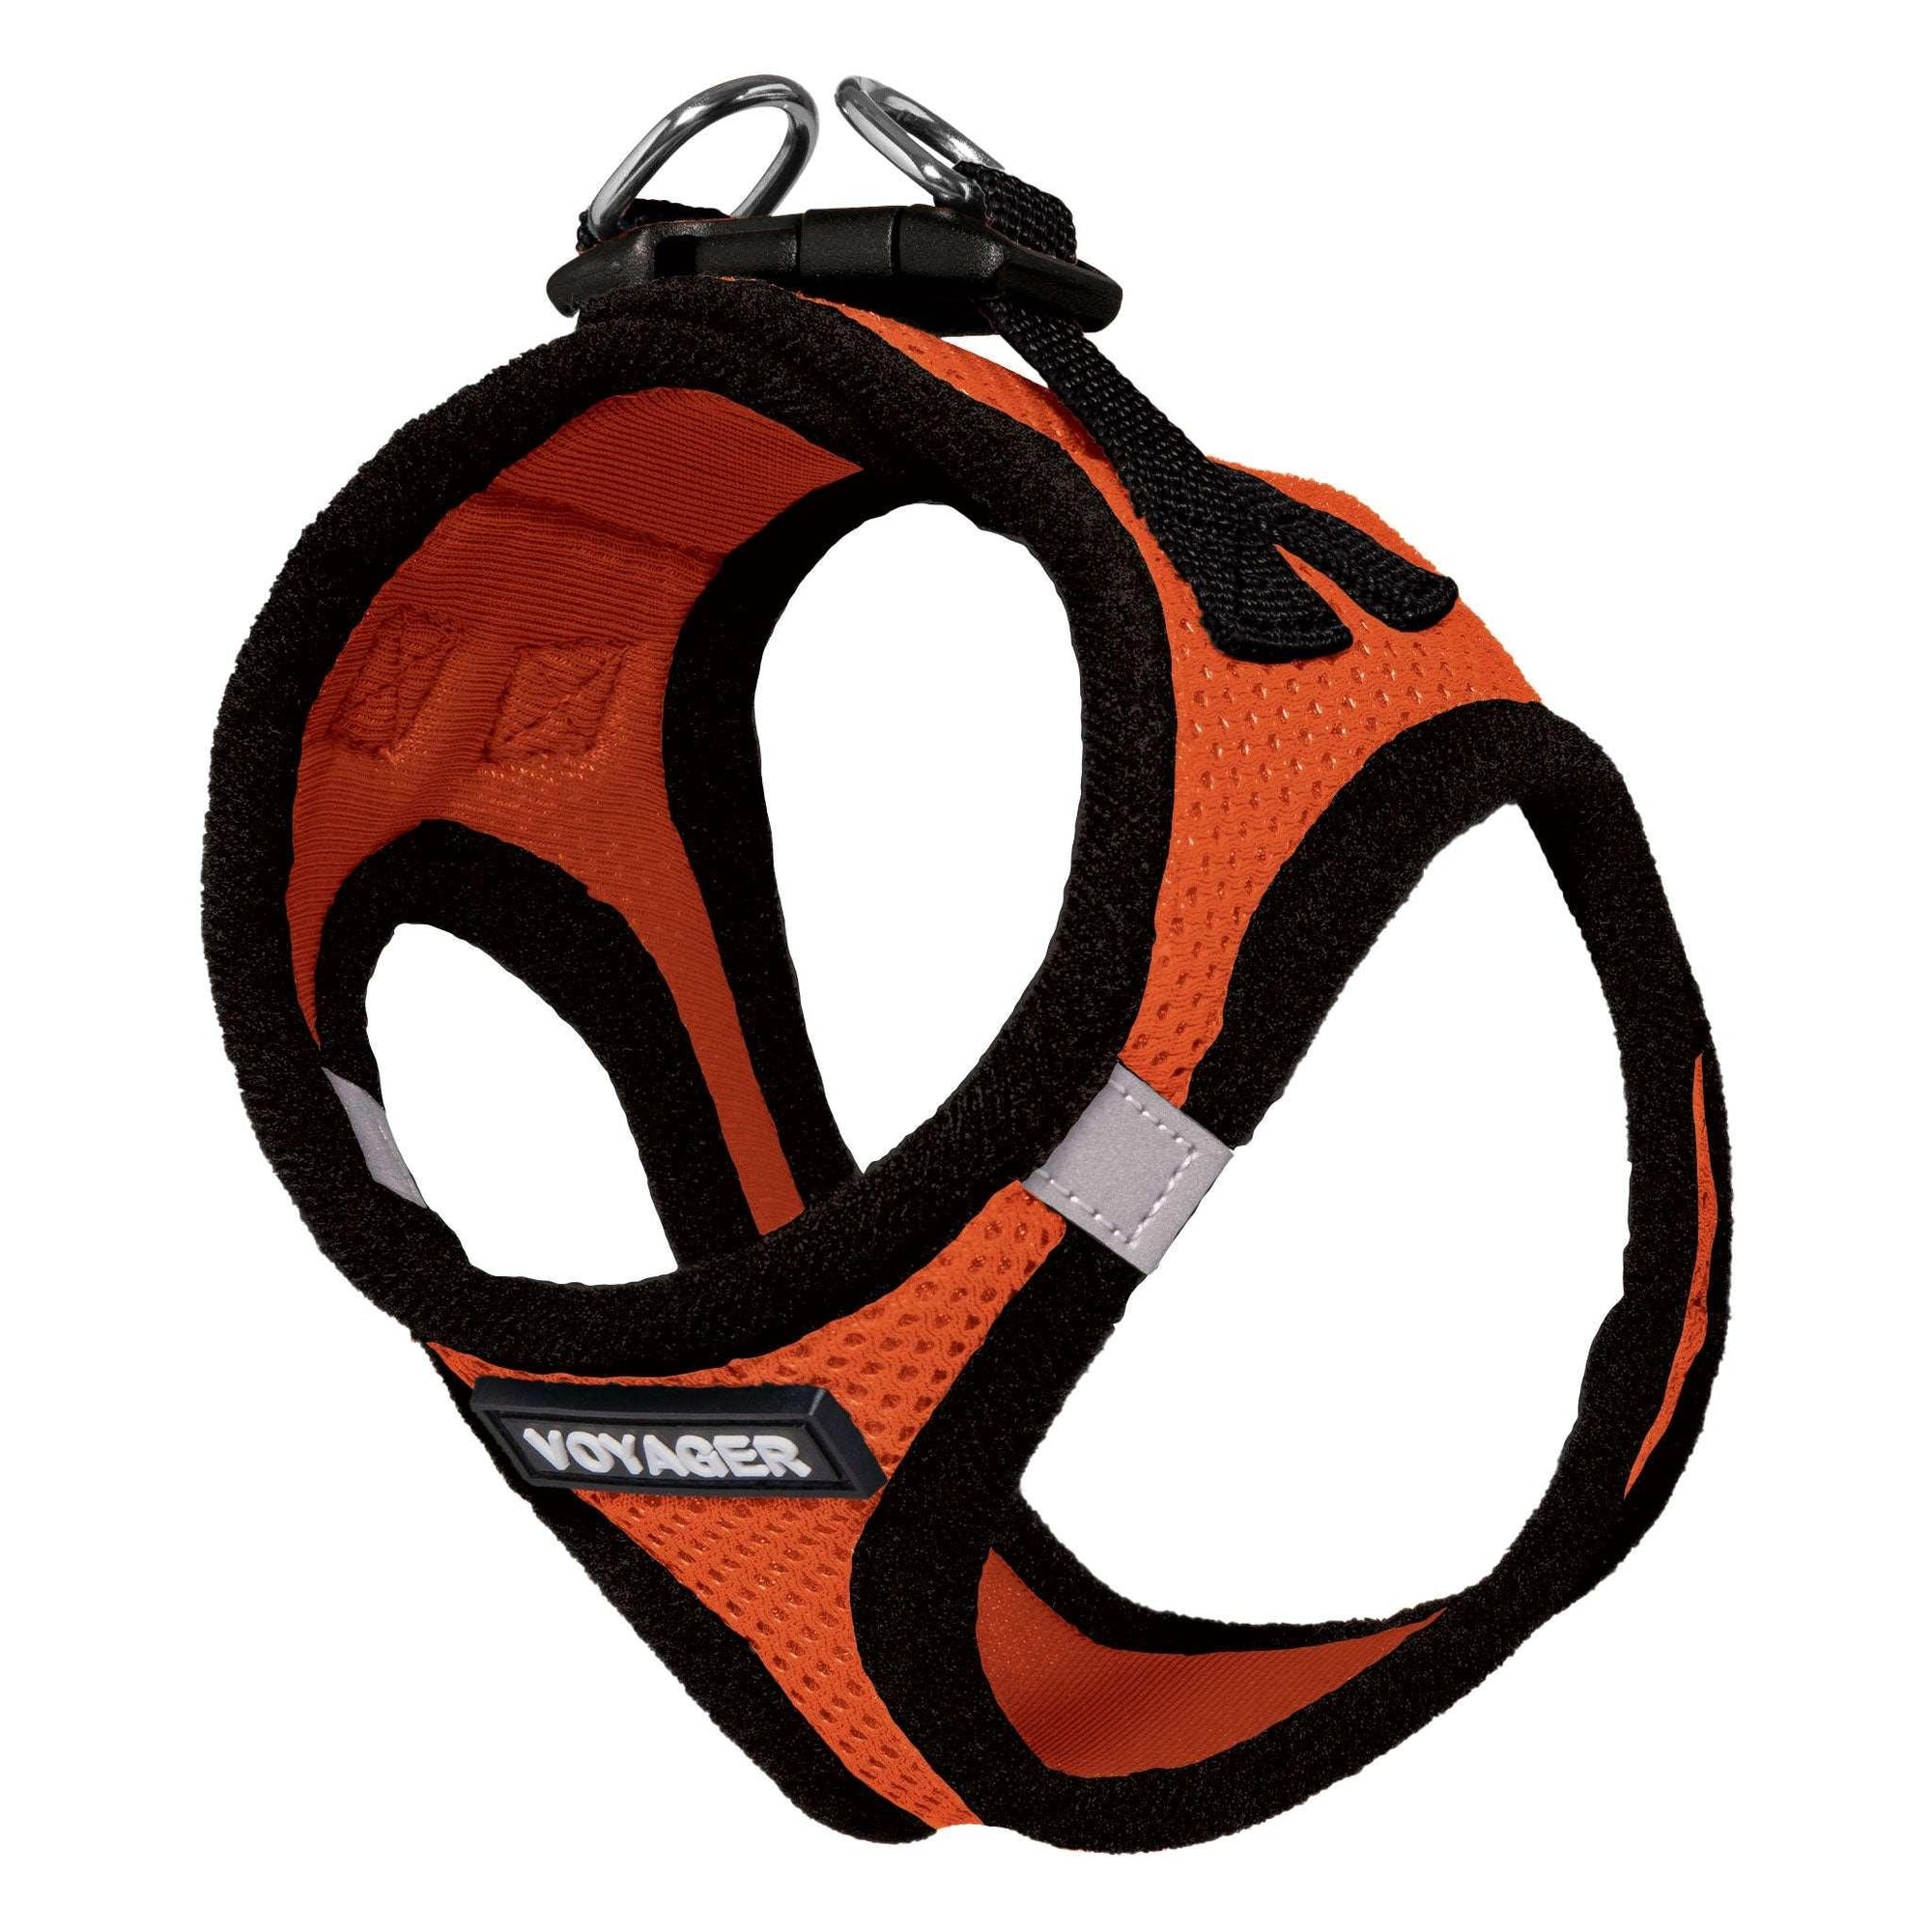 VOYAGER Step-In Air Pet Harness in Orange with Black Trim - Expanded